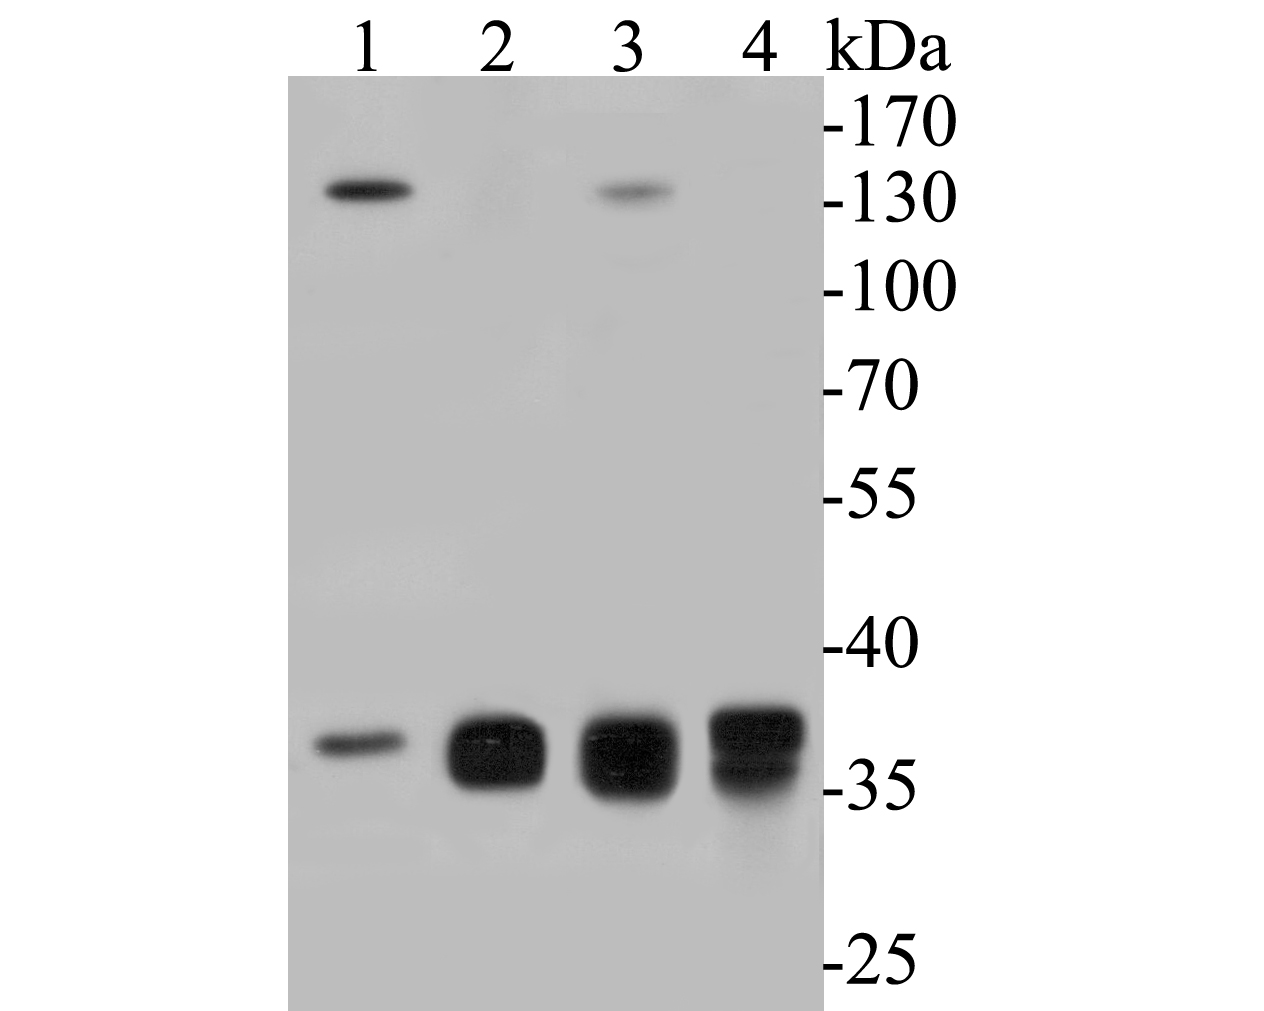 Western blot analysis of Aldolase B on different lysates. Proteins were transferred to a PVDF membrane and blocked with 5% BSA in PBS for 1 hour at room temperature. The primary antibody (ER1901-42, 1/500) was used in 5% BSA at room temperature for 2 hours. Goat Anti-Rabbit IgG - HRP Secondary Antibody (HA1001) at 1:5,000 dilution was used for 1 hour at room temperature.<br />
Positive control: <br />
Lane 1: SH-SY5Y cell lysate<br />
Lane 2: human liver tissue lysate<br />
Lane 3: mouse liver tissue lysate<br />
Lane 4: mouse kidney tissue lysate